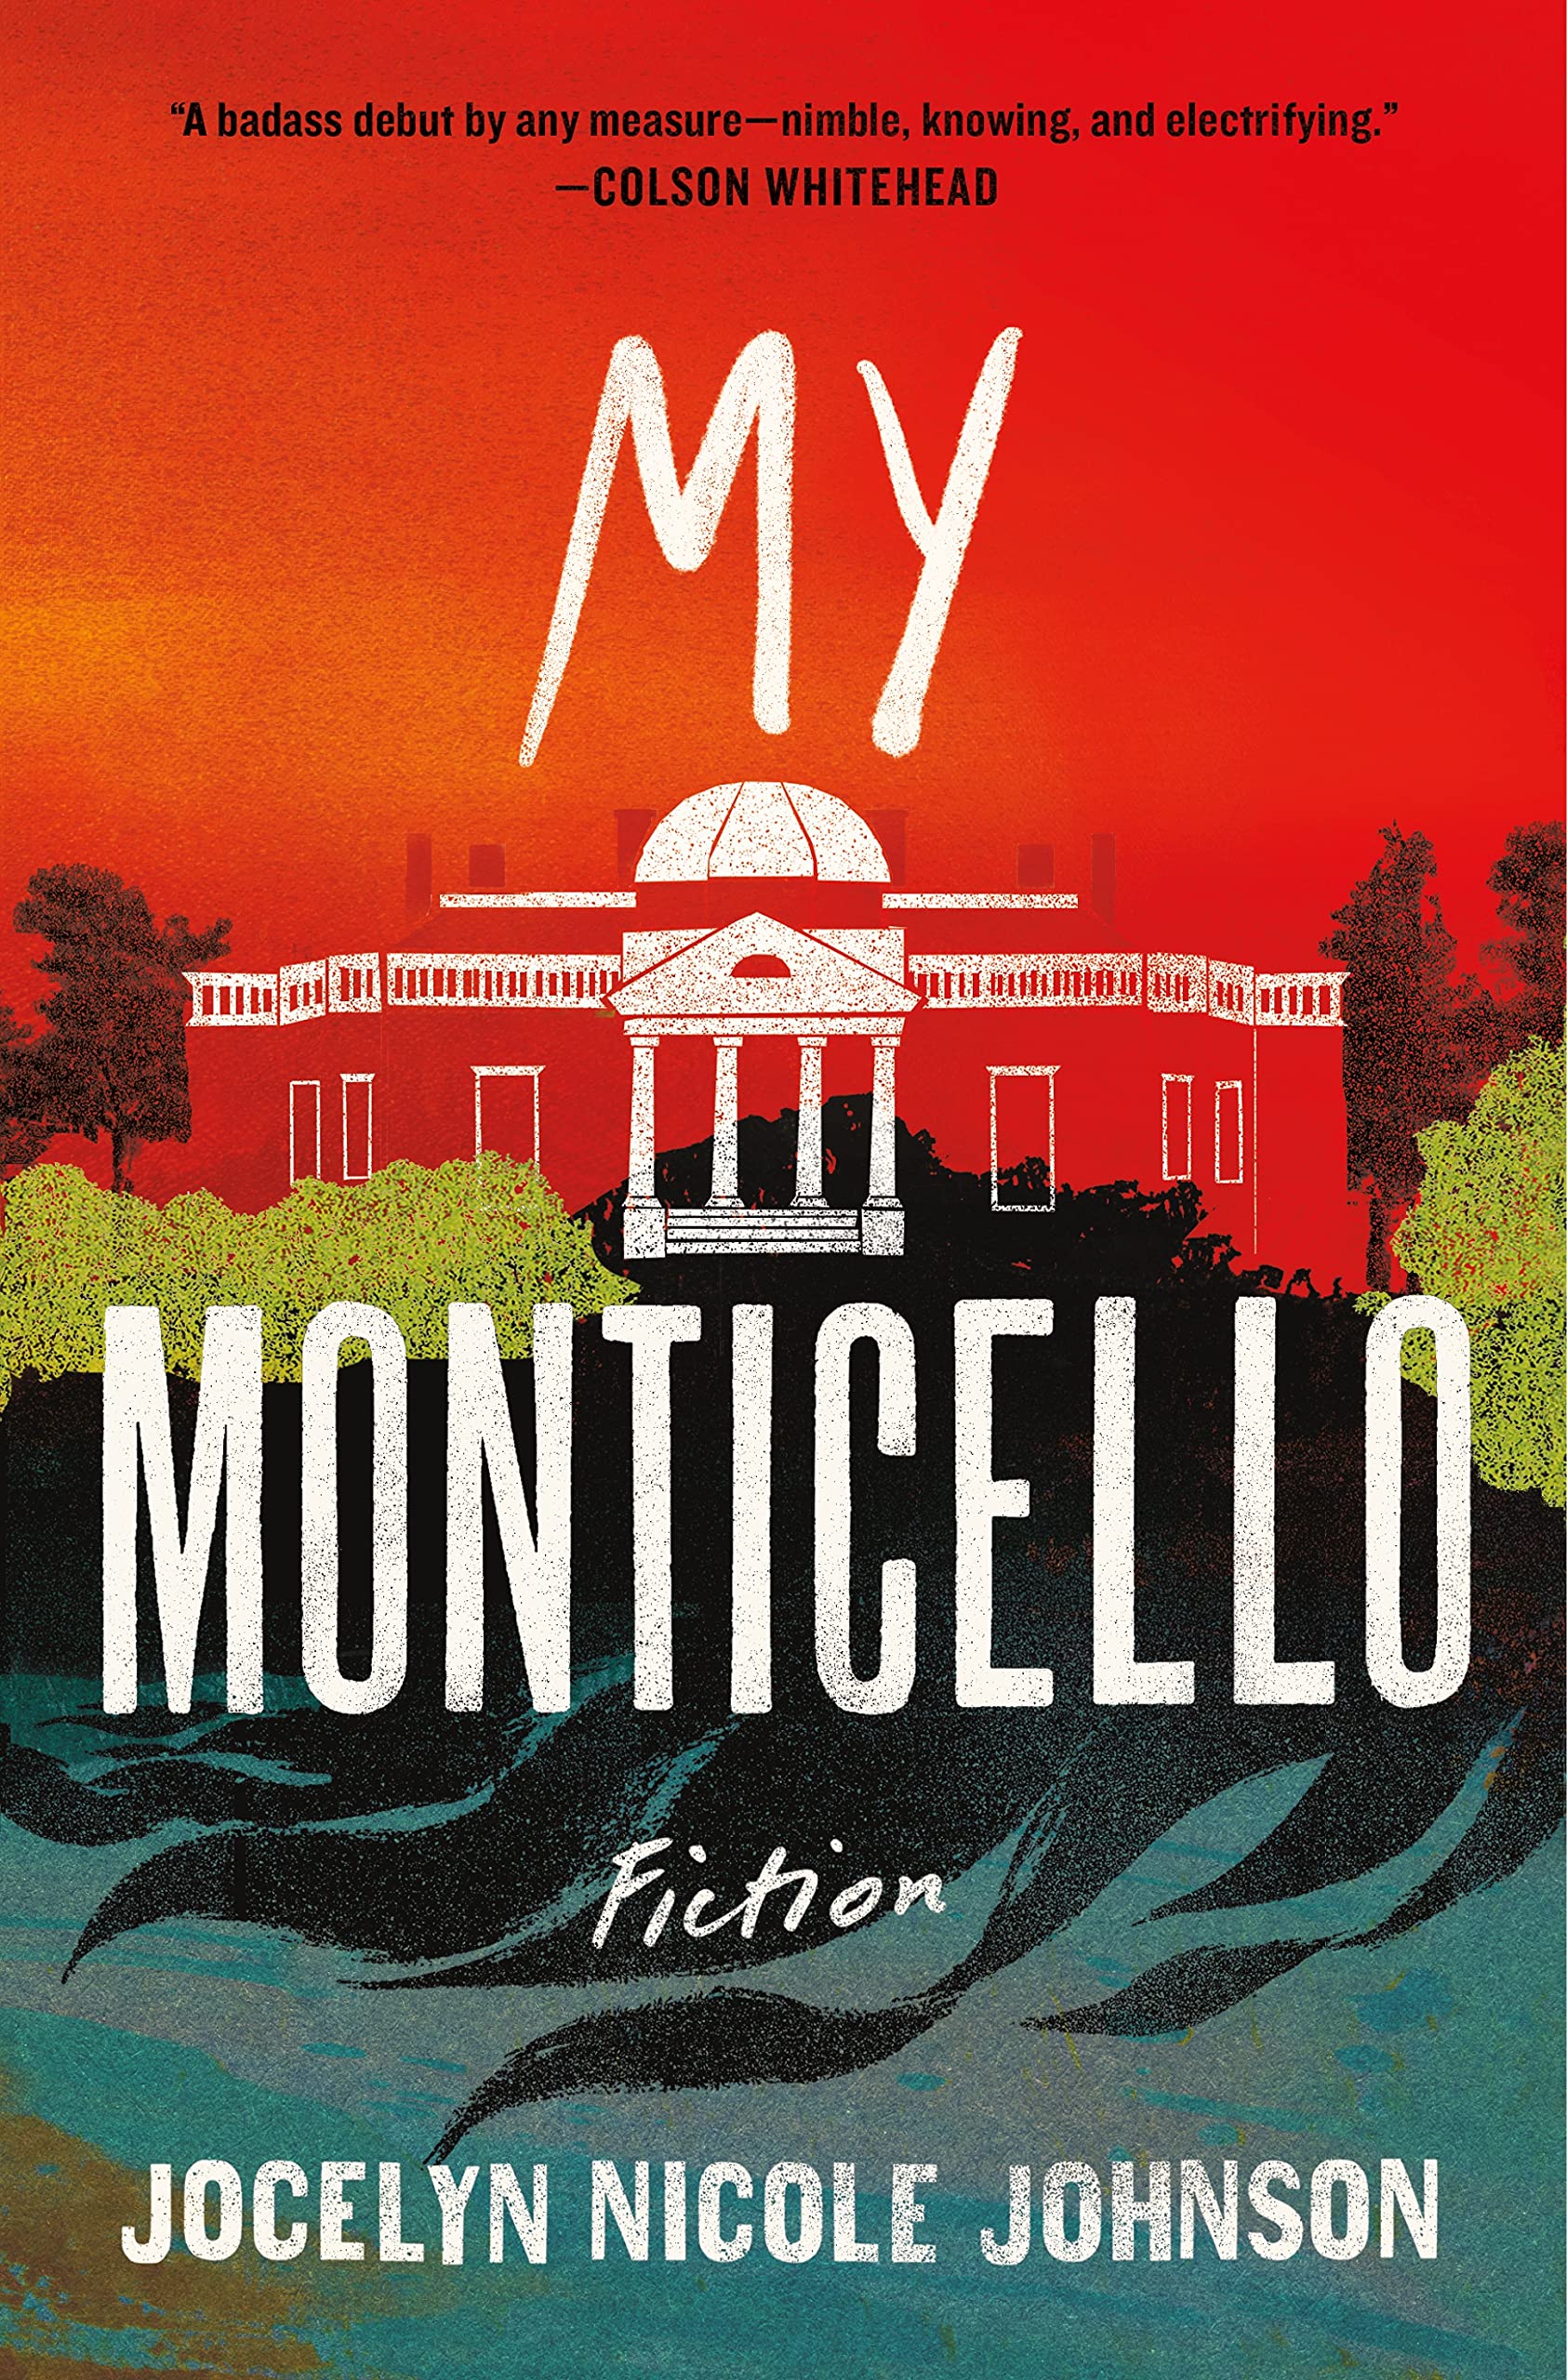 Cover of My Monticello, a white line drawing of Monticello over a red sky and black flames